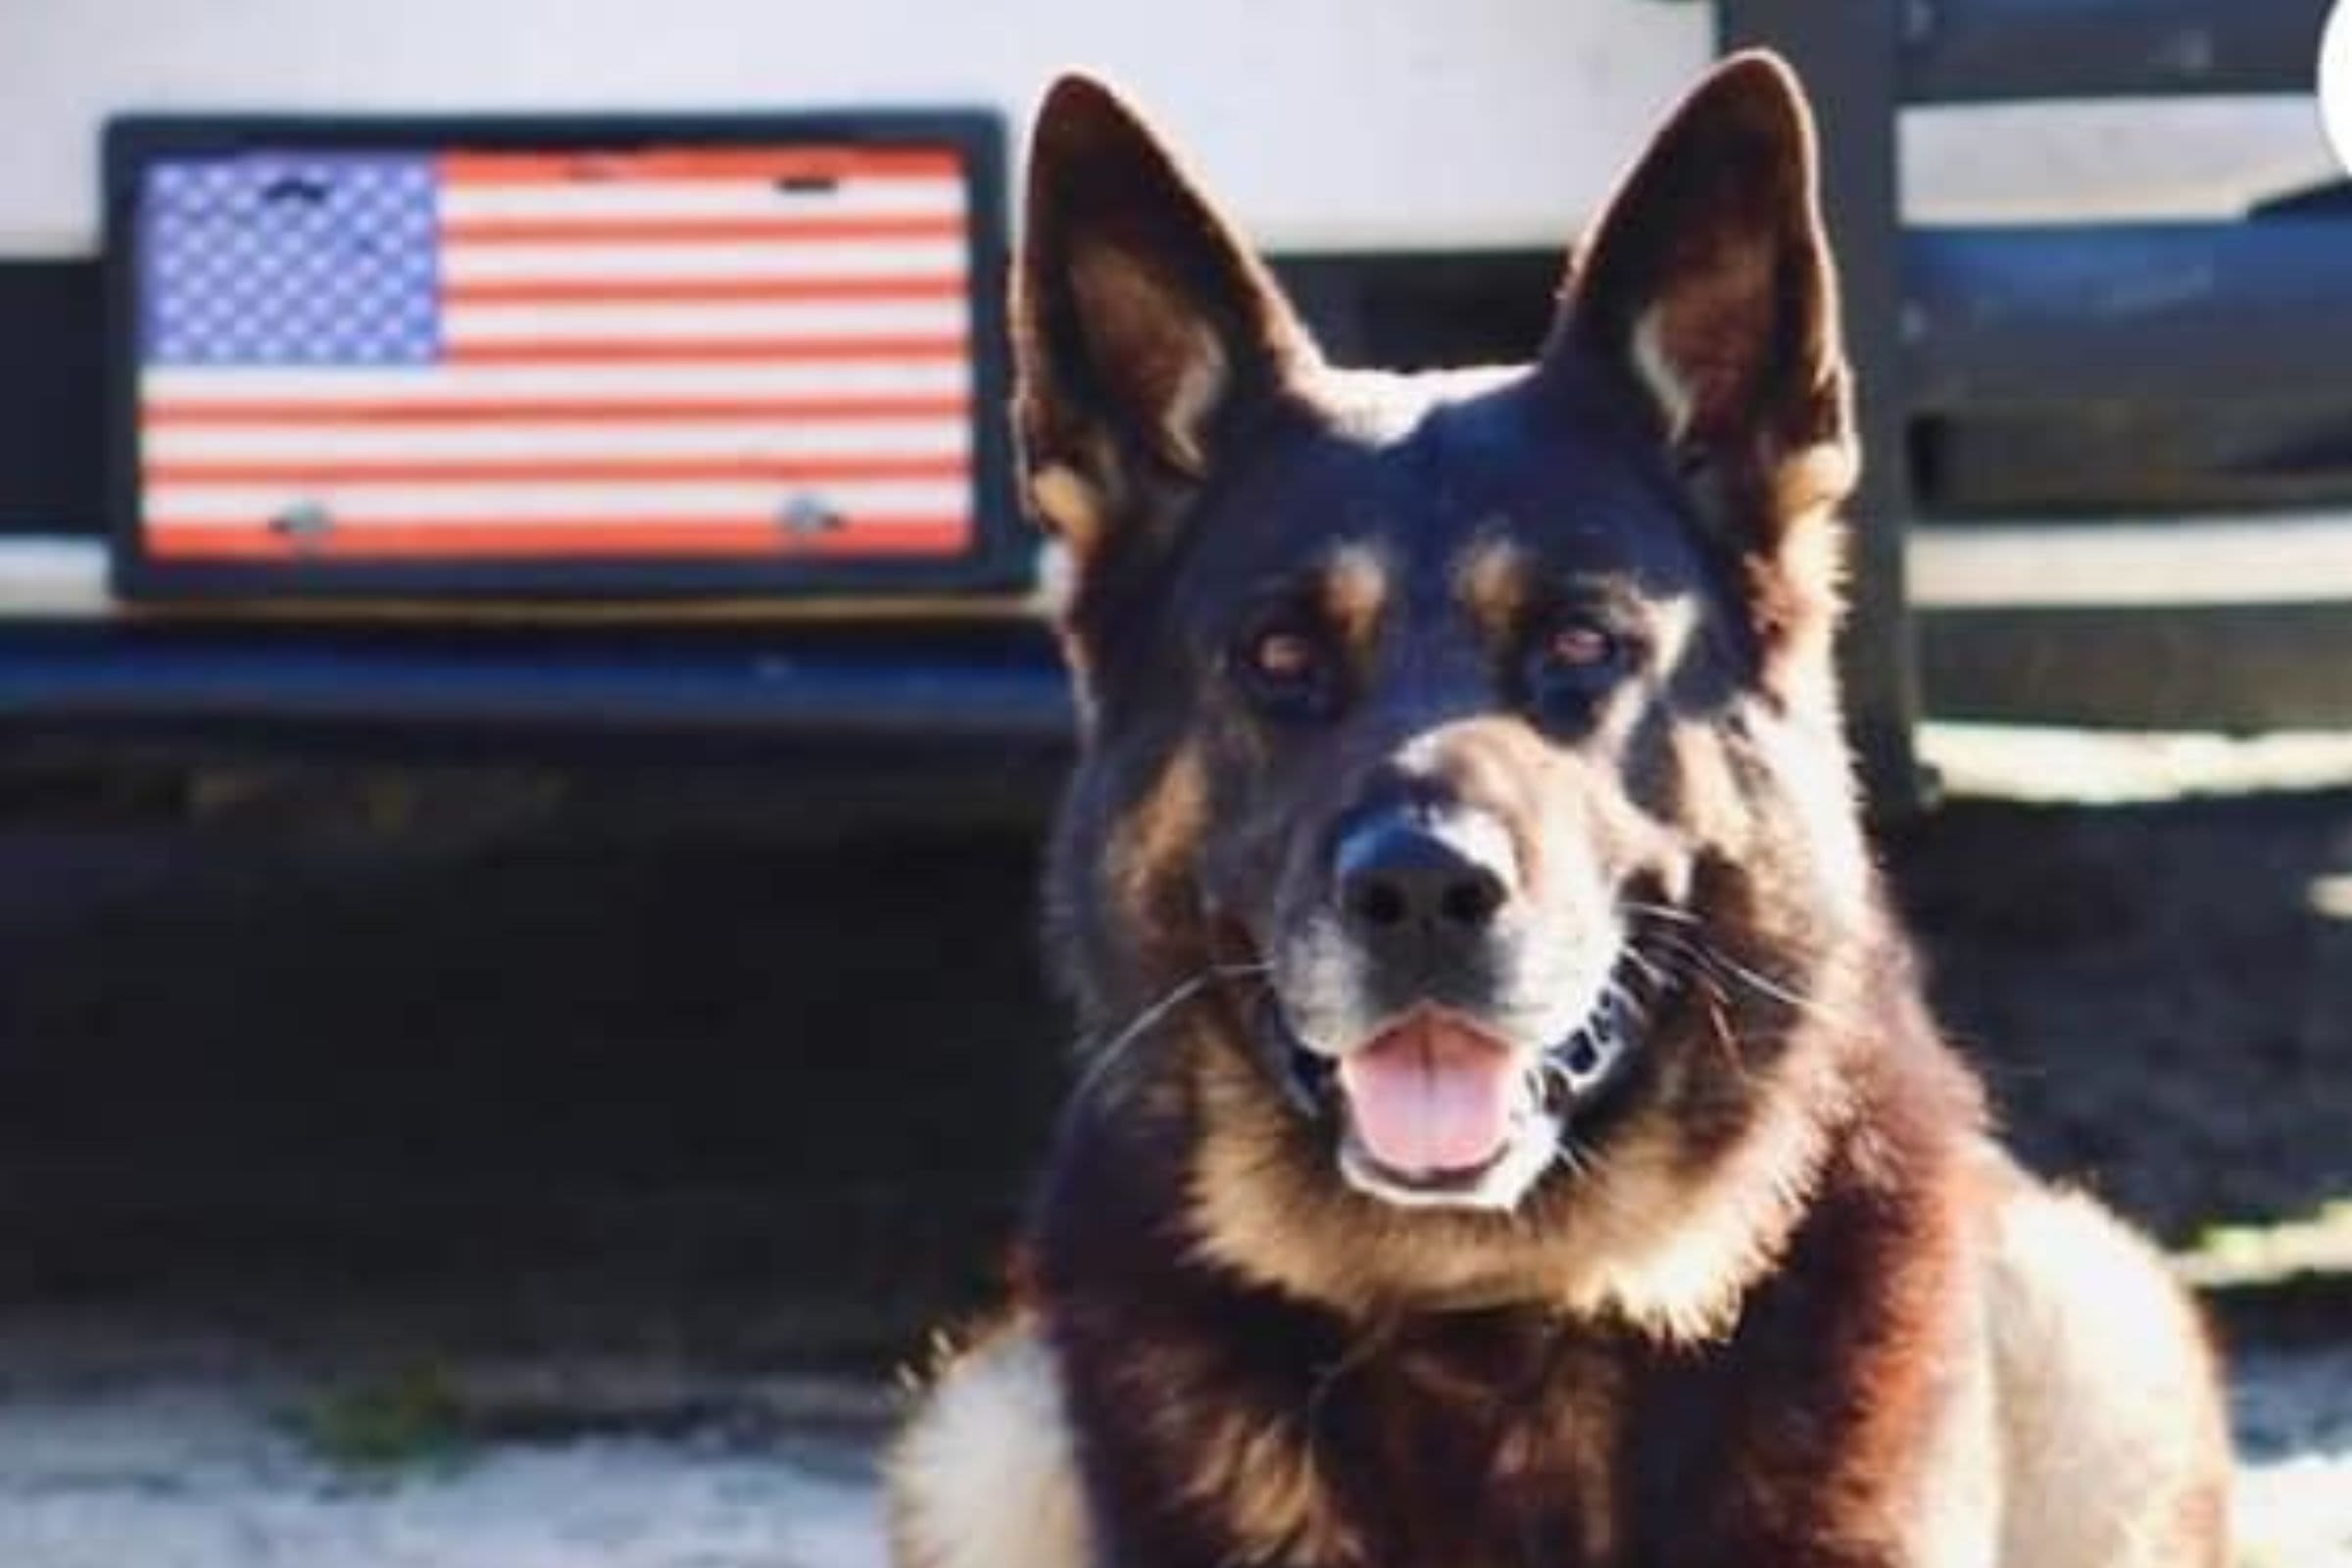 Florida K-9 dies tracking suspect in heat: Archer 'fulfilled his duty'